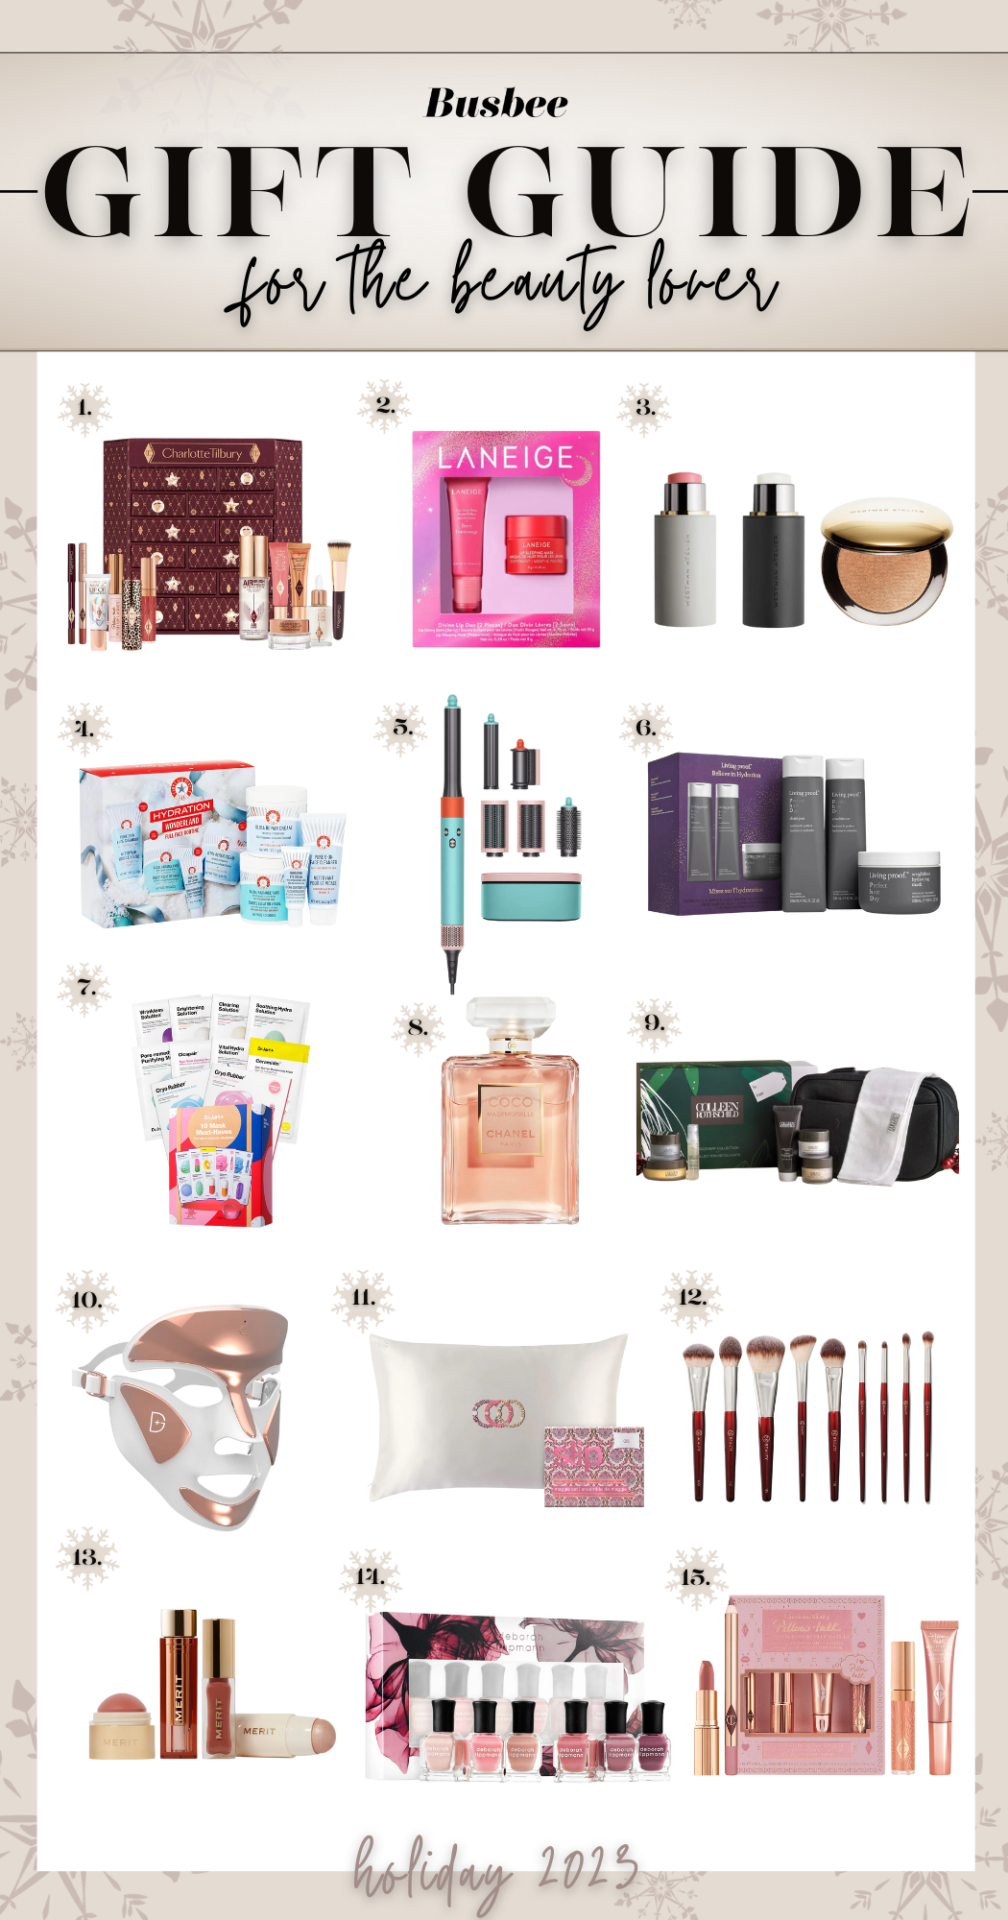 GiftGuides: Gifts for the Beauty Queen - ShareASale Blog